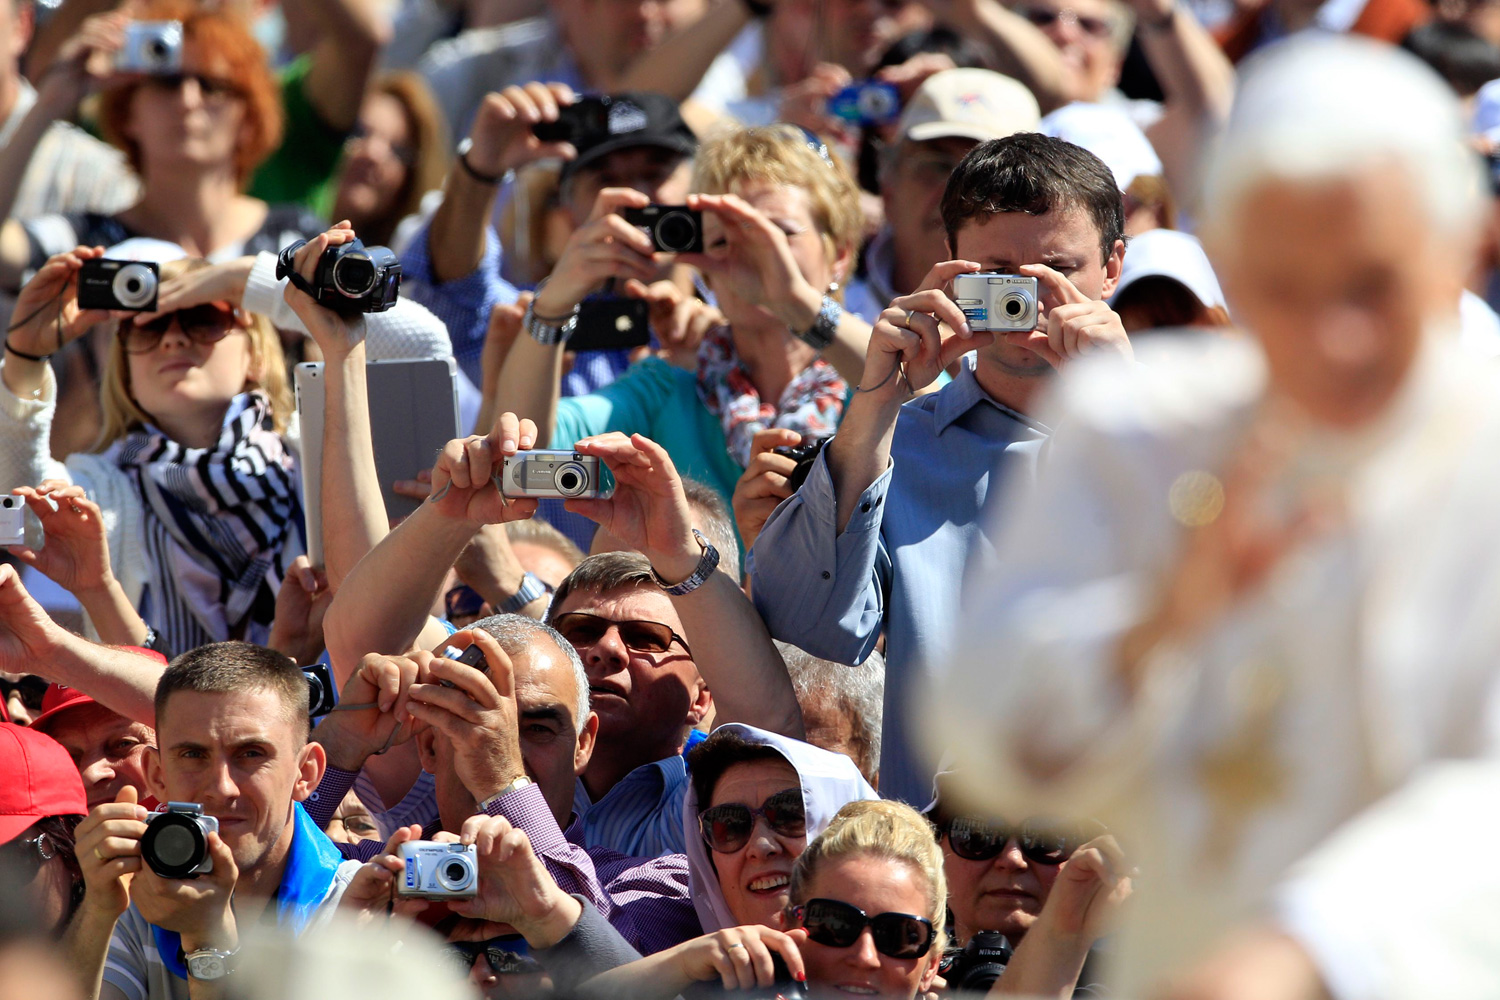 May 2, 2012. Visitors take pictures of Pope Benedict XVI during his weekly audience in Saint Peter's Square at the Vatican.